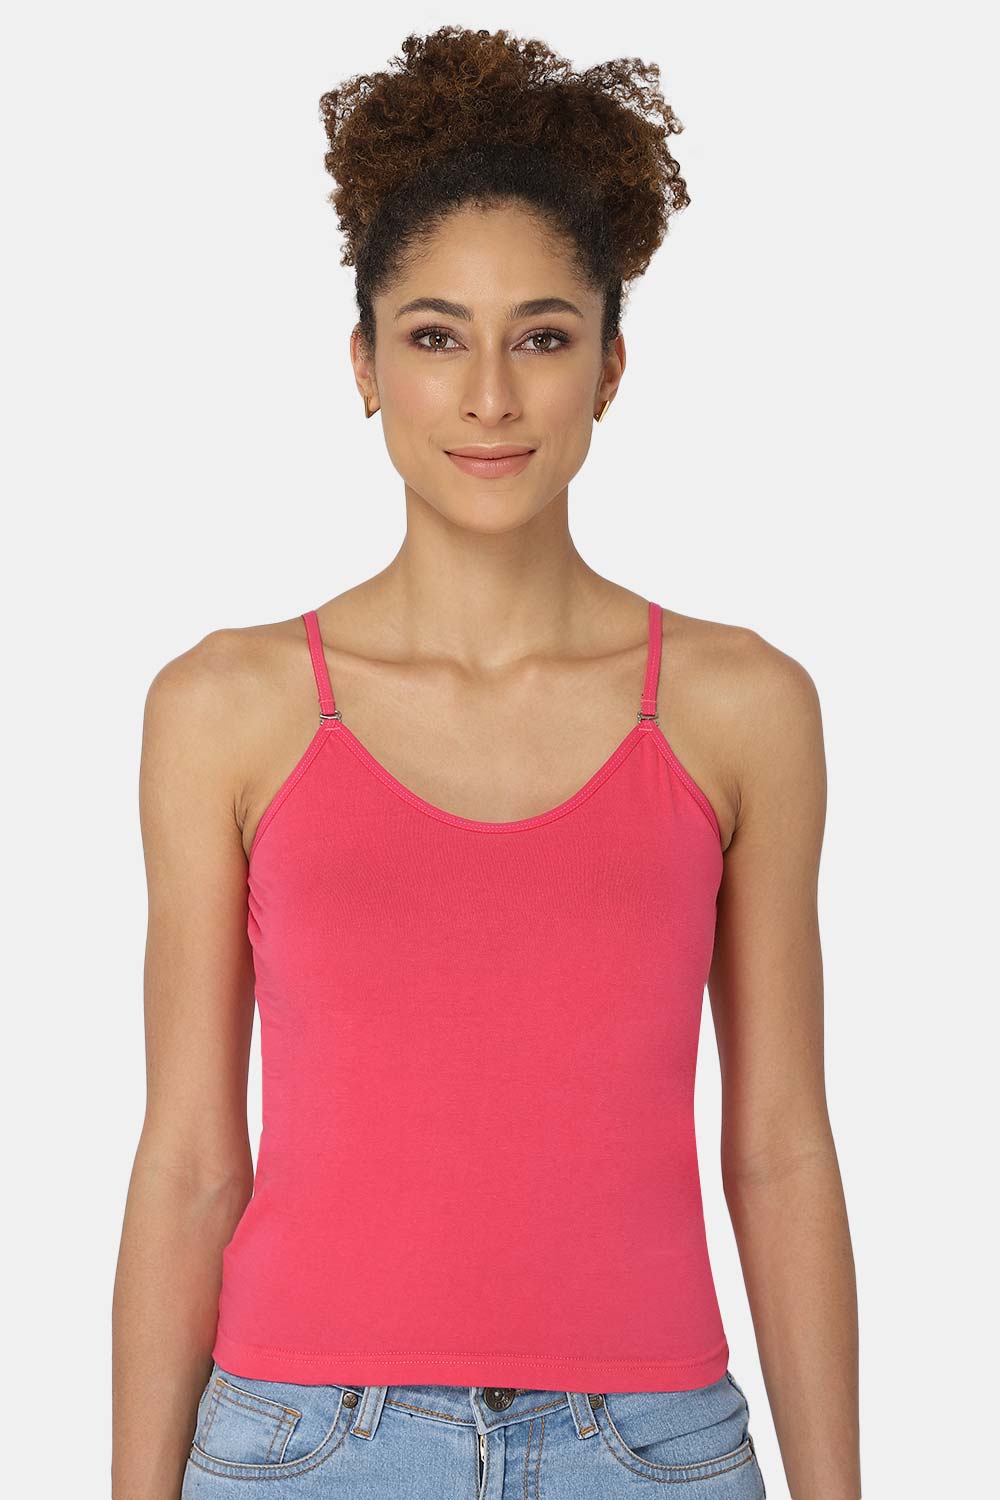 Stylish Camisoles for the Fashion Conscious